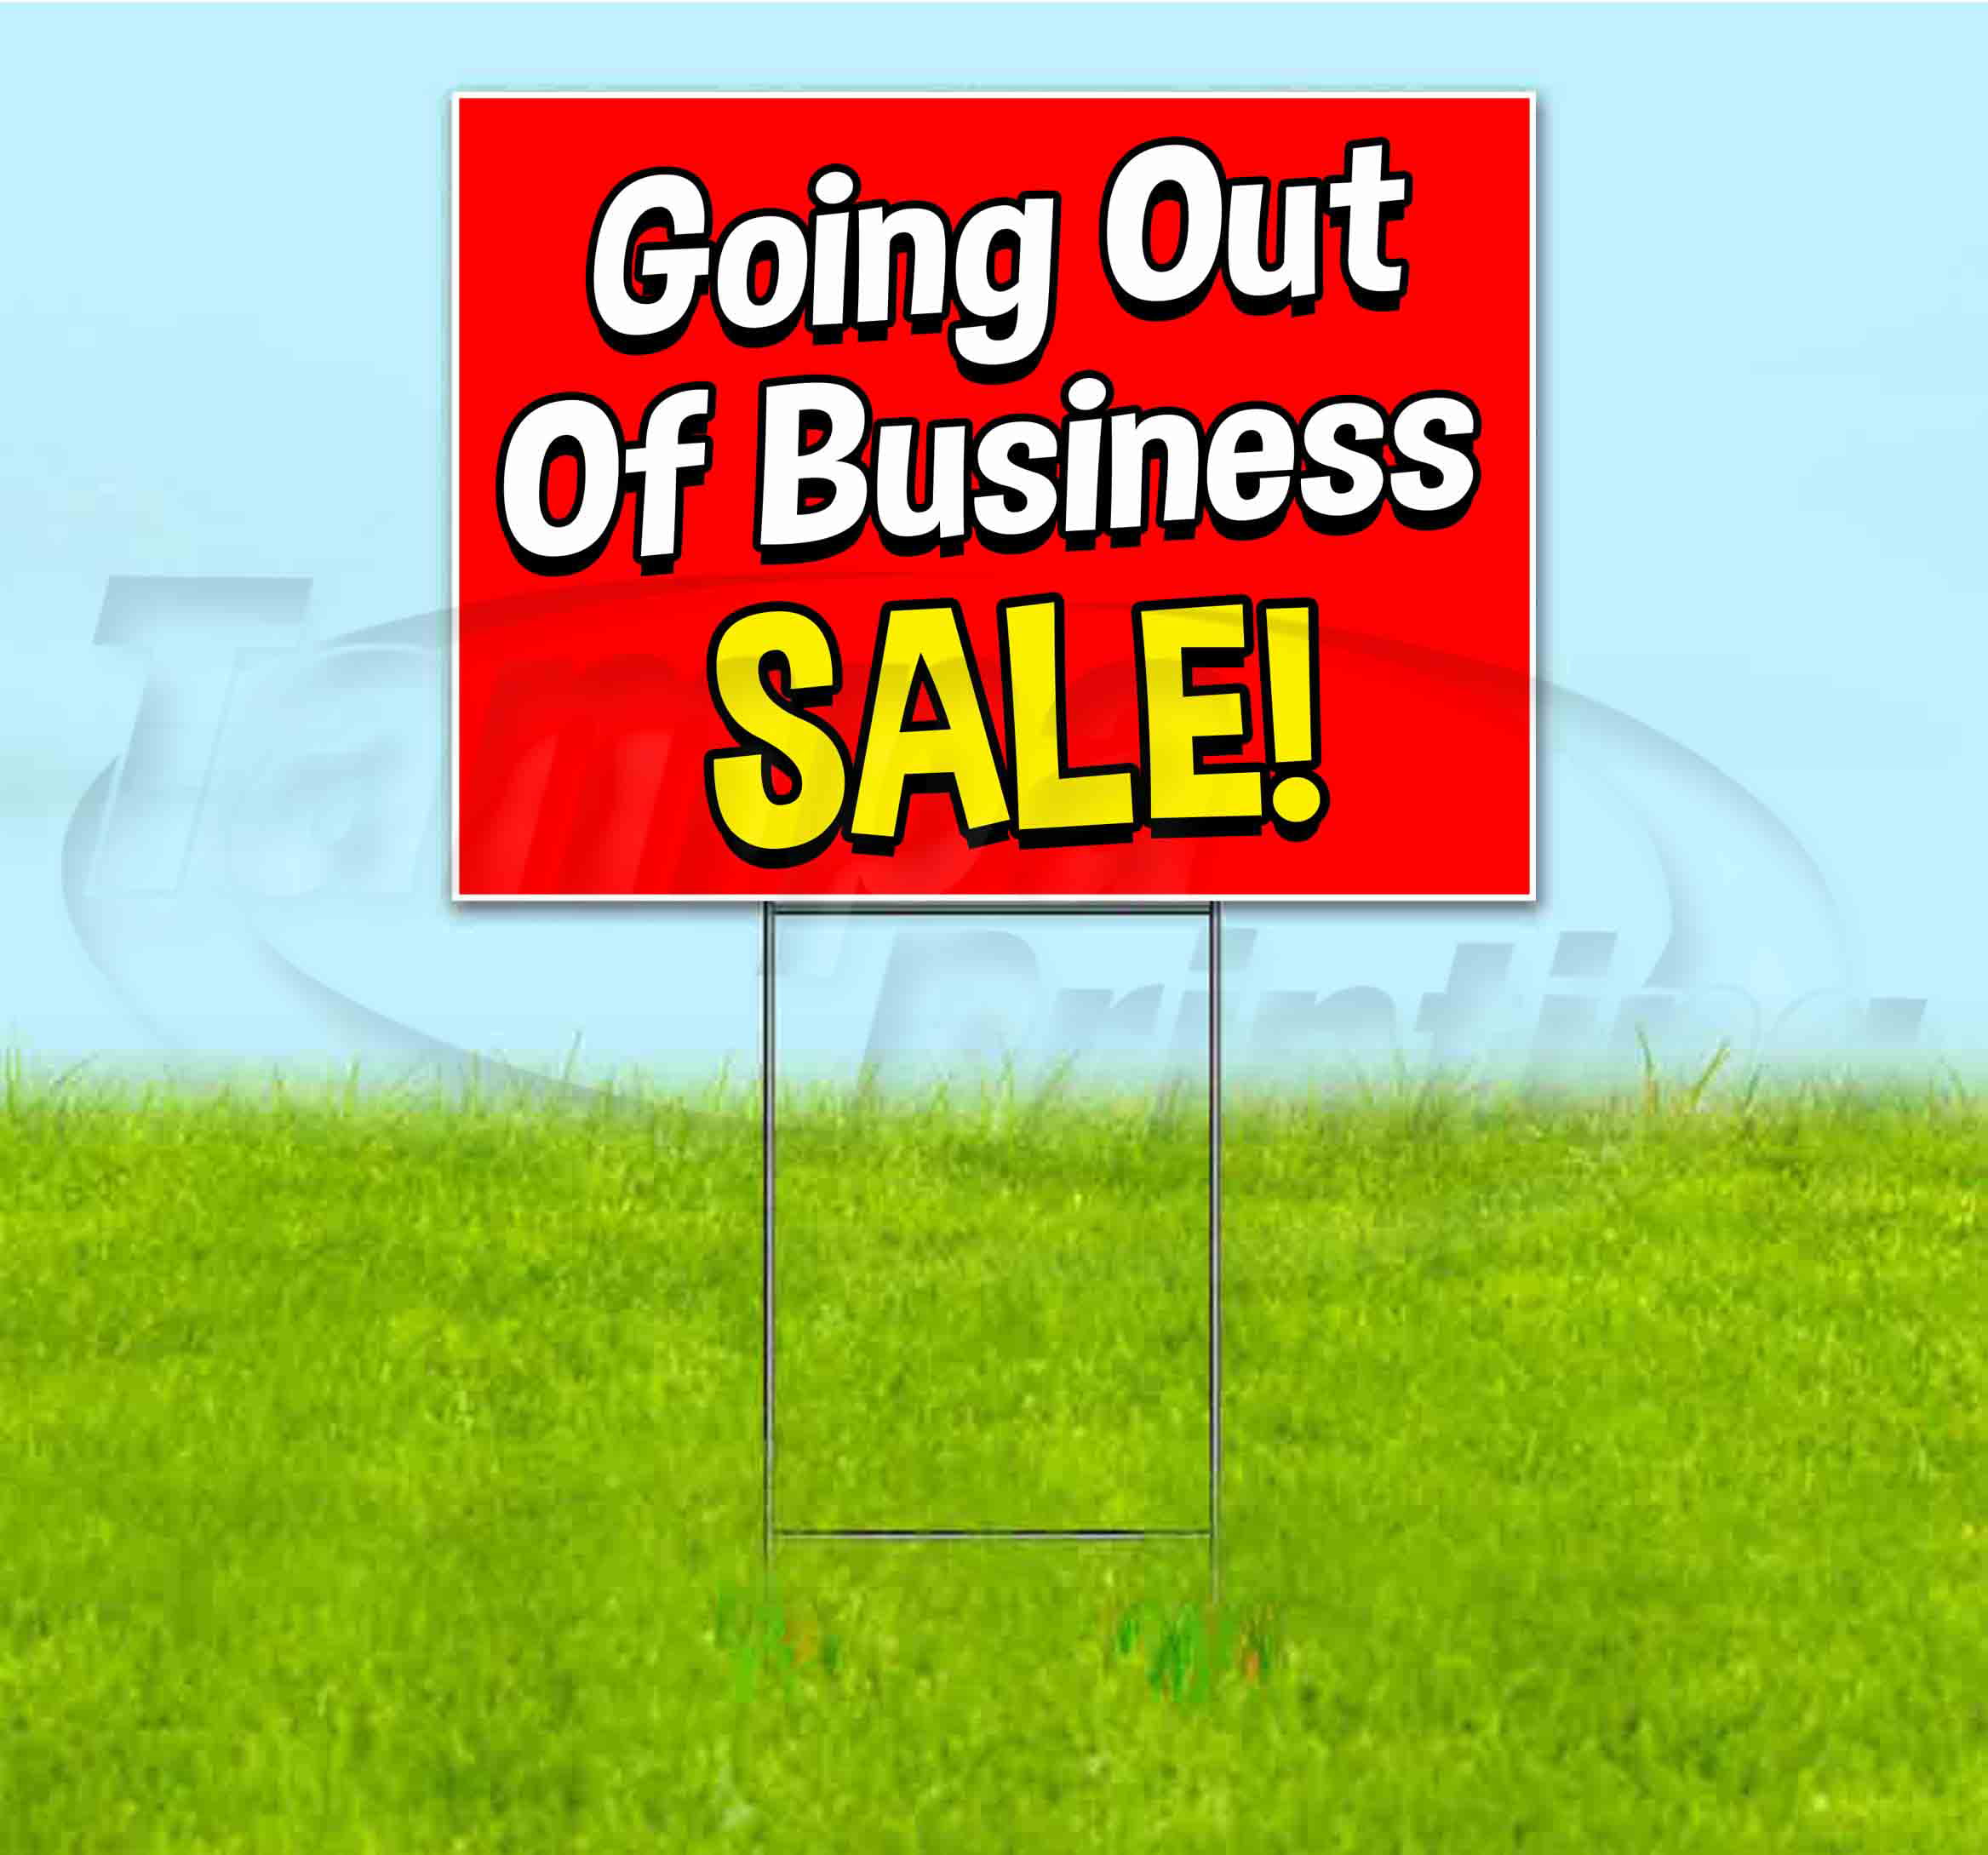 Going Out Of Business Sale (18" x 24") Yard Sign, Includes Metal Step